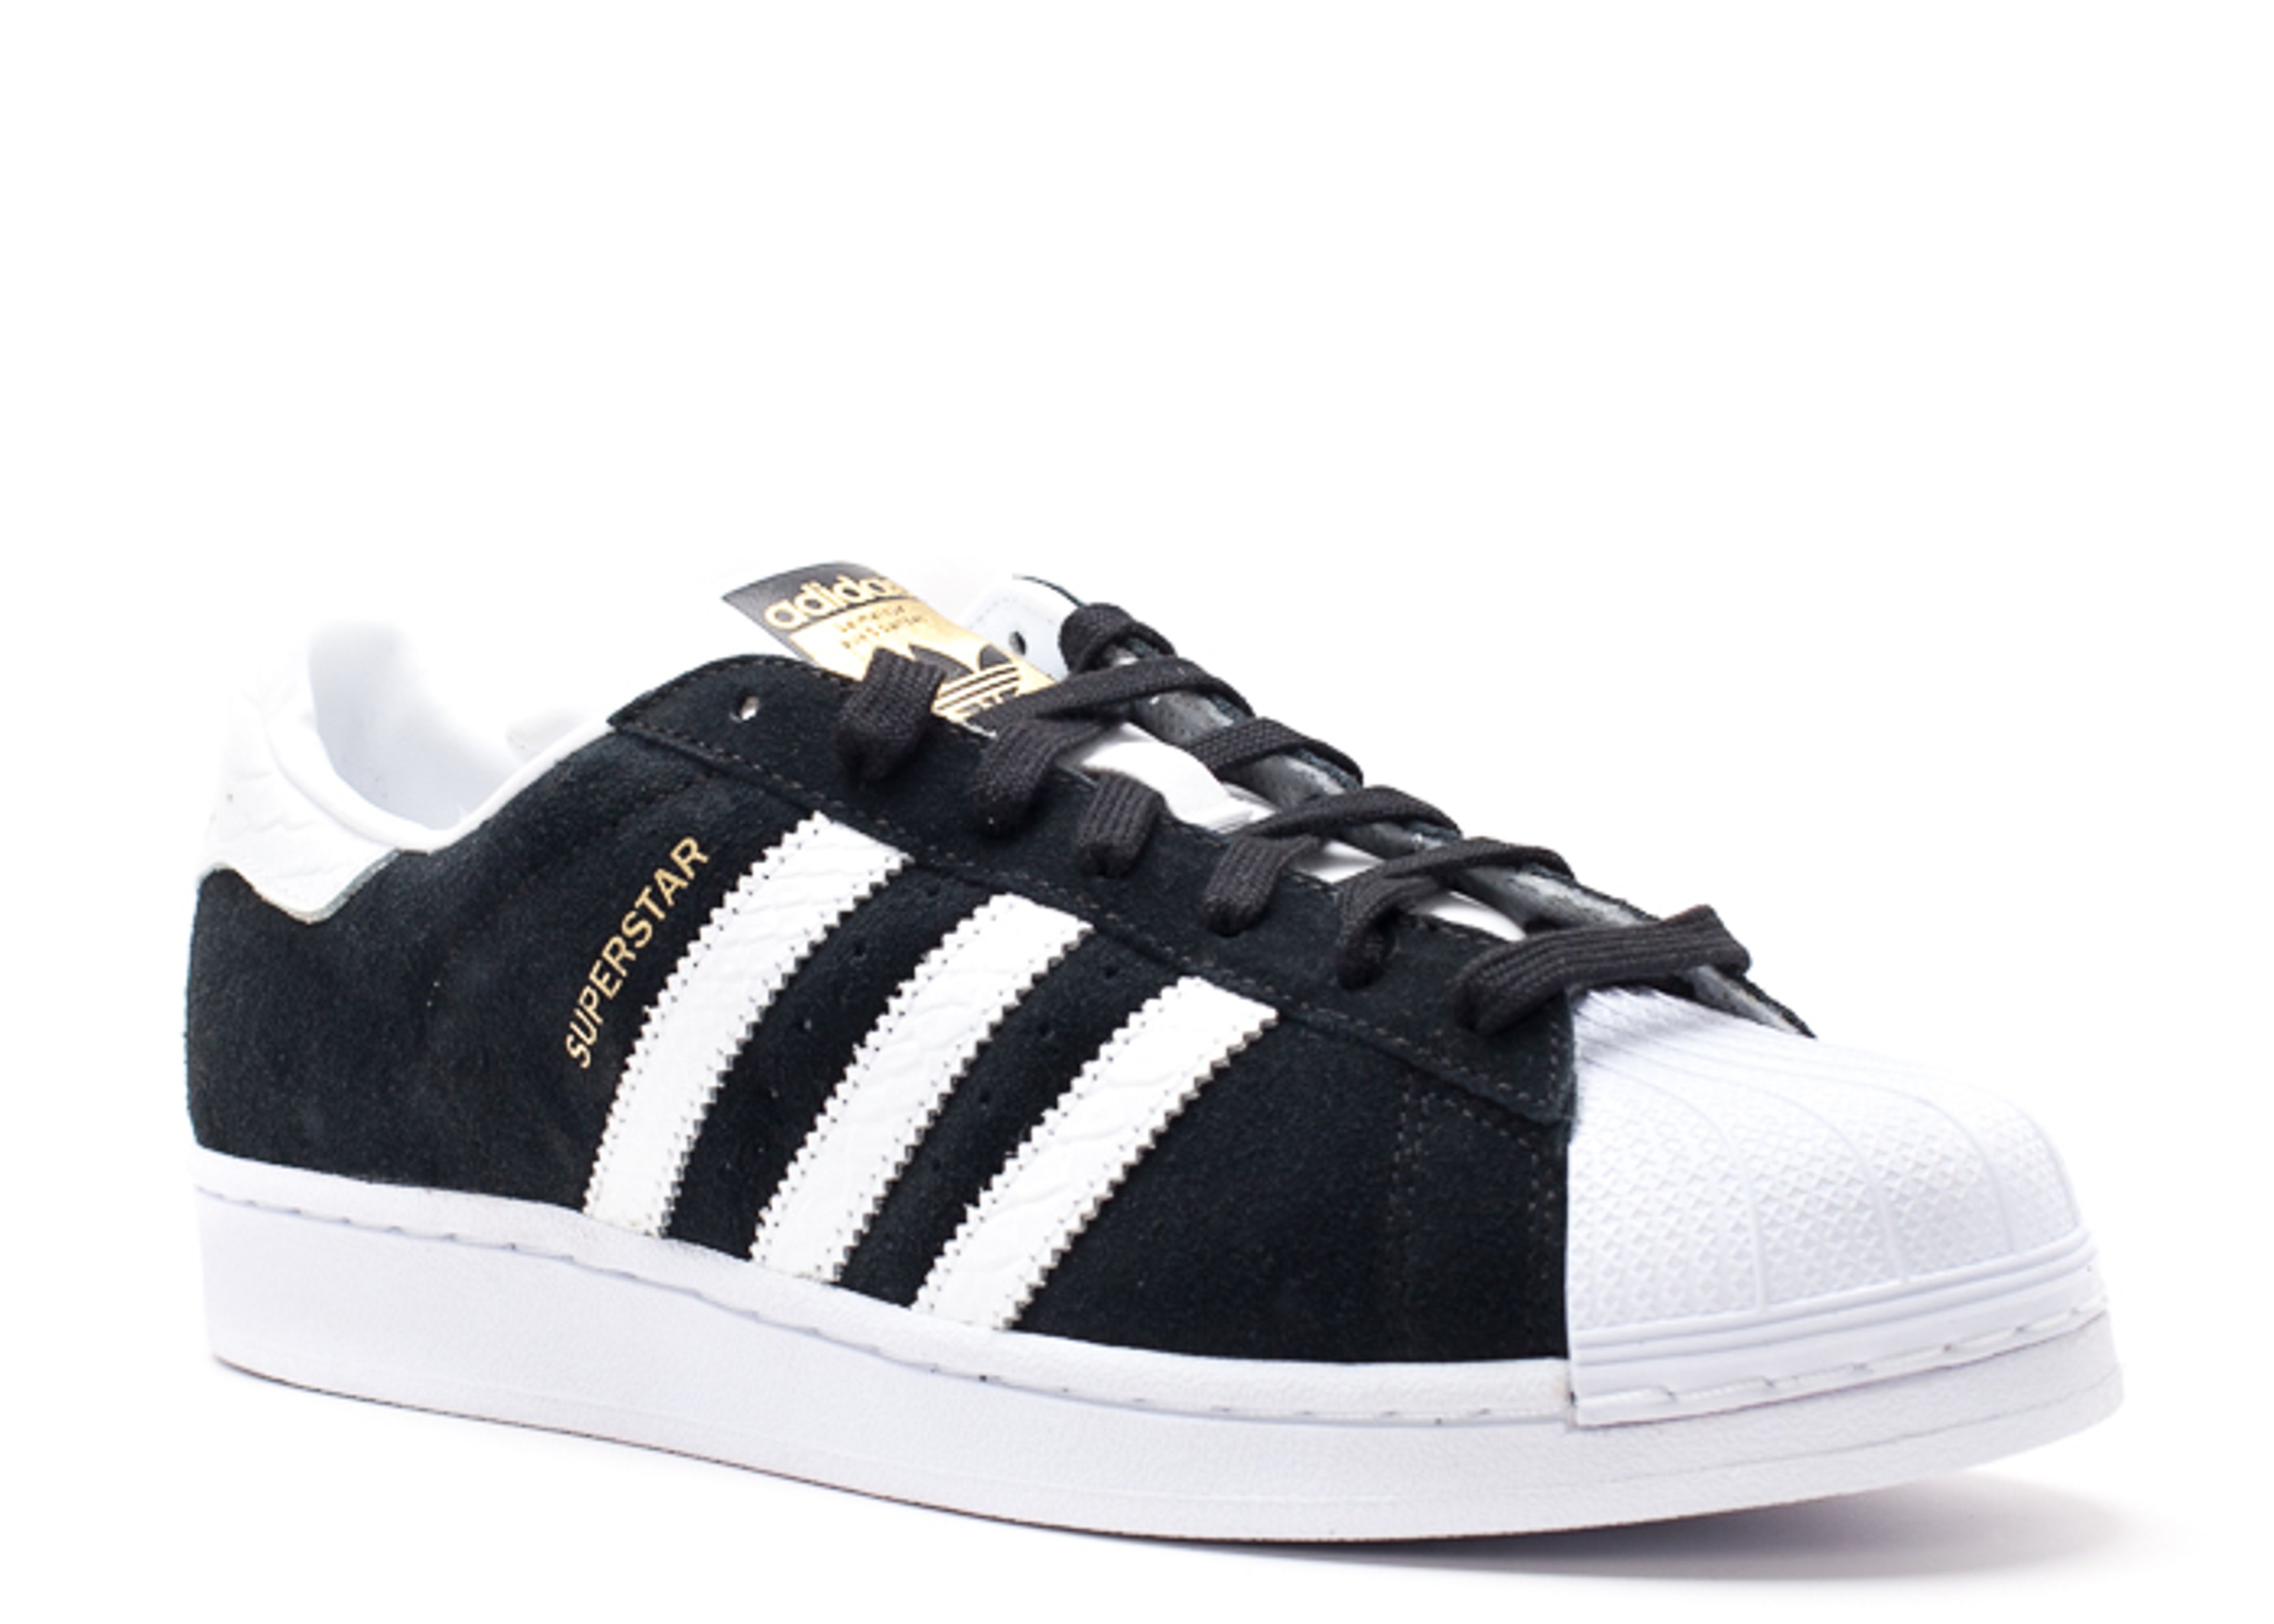 adidas superstar east river rivalry